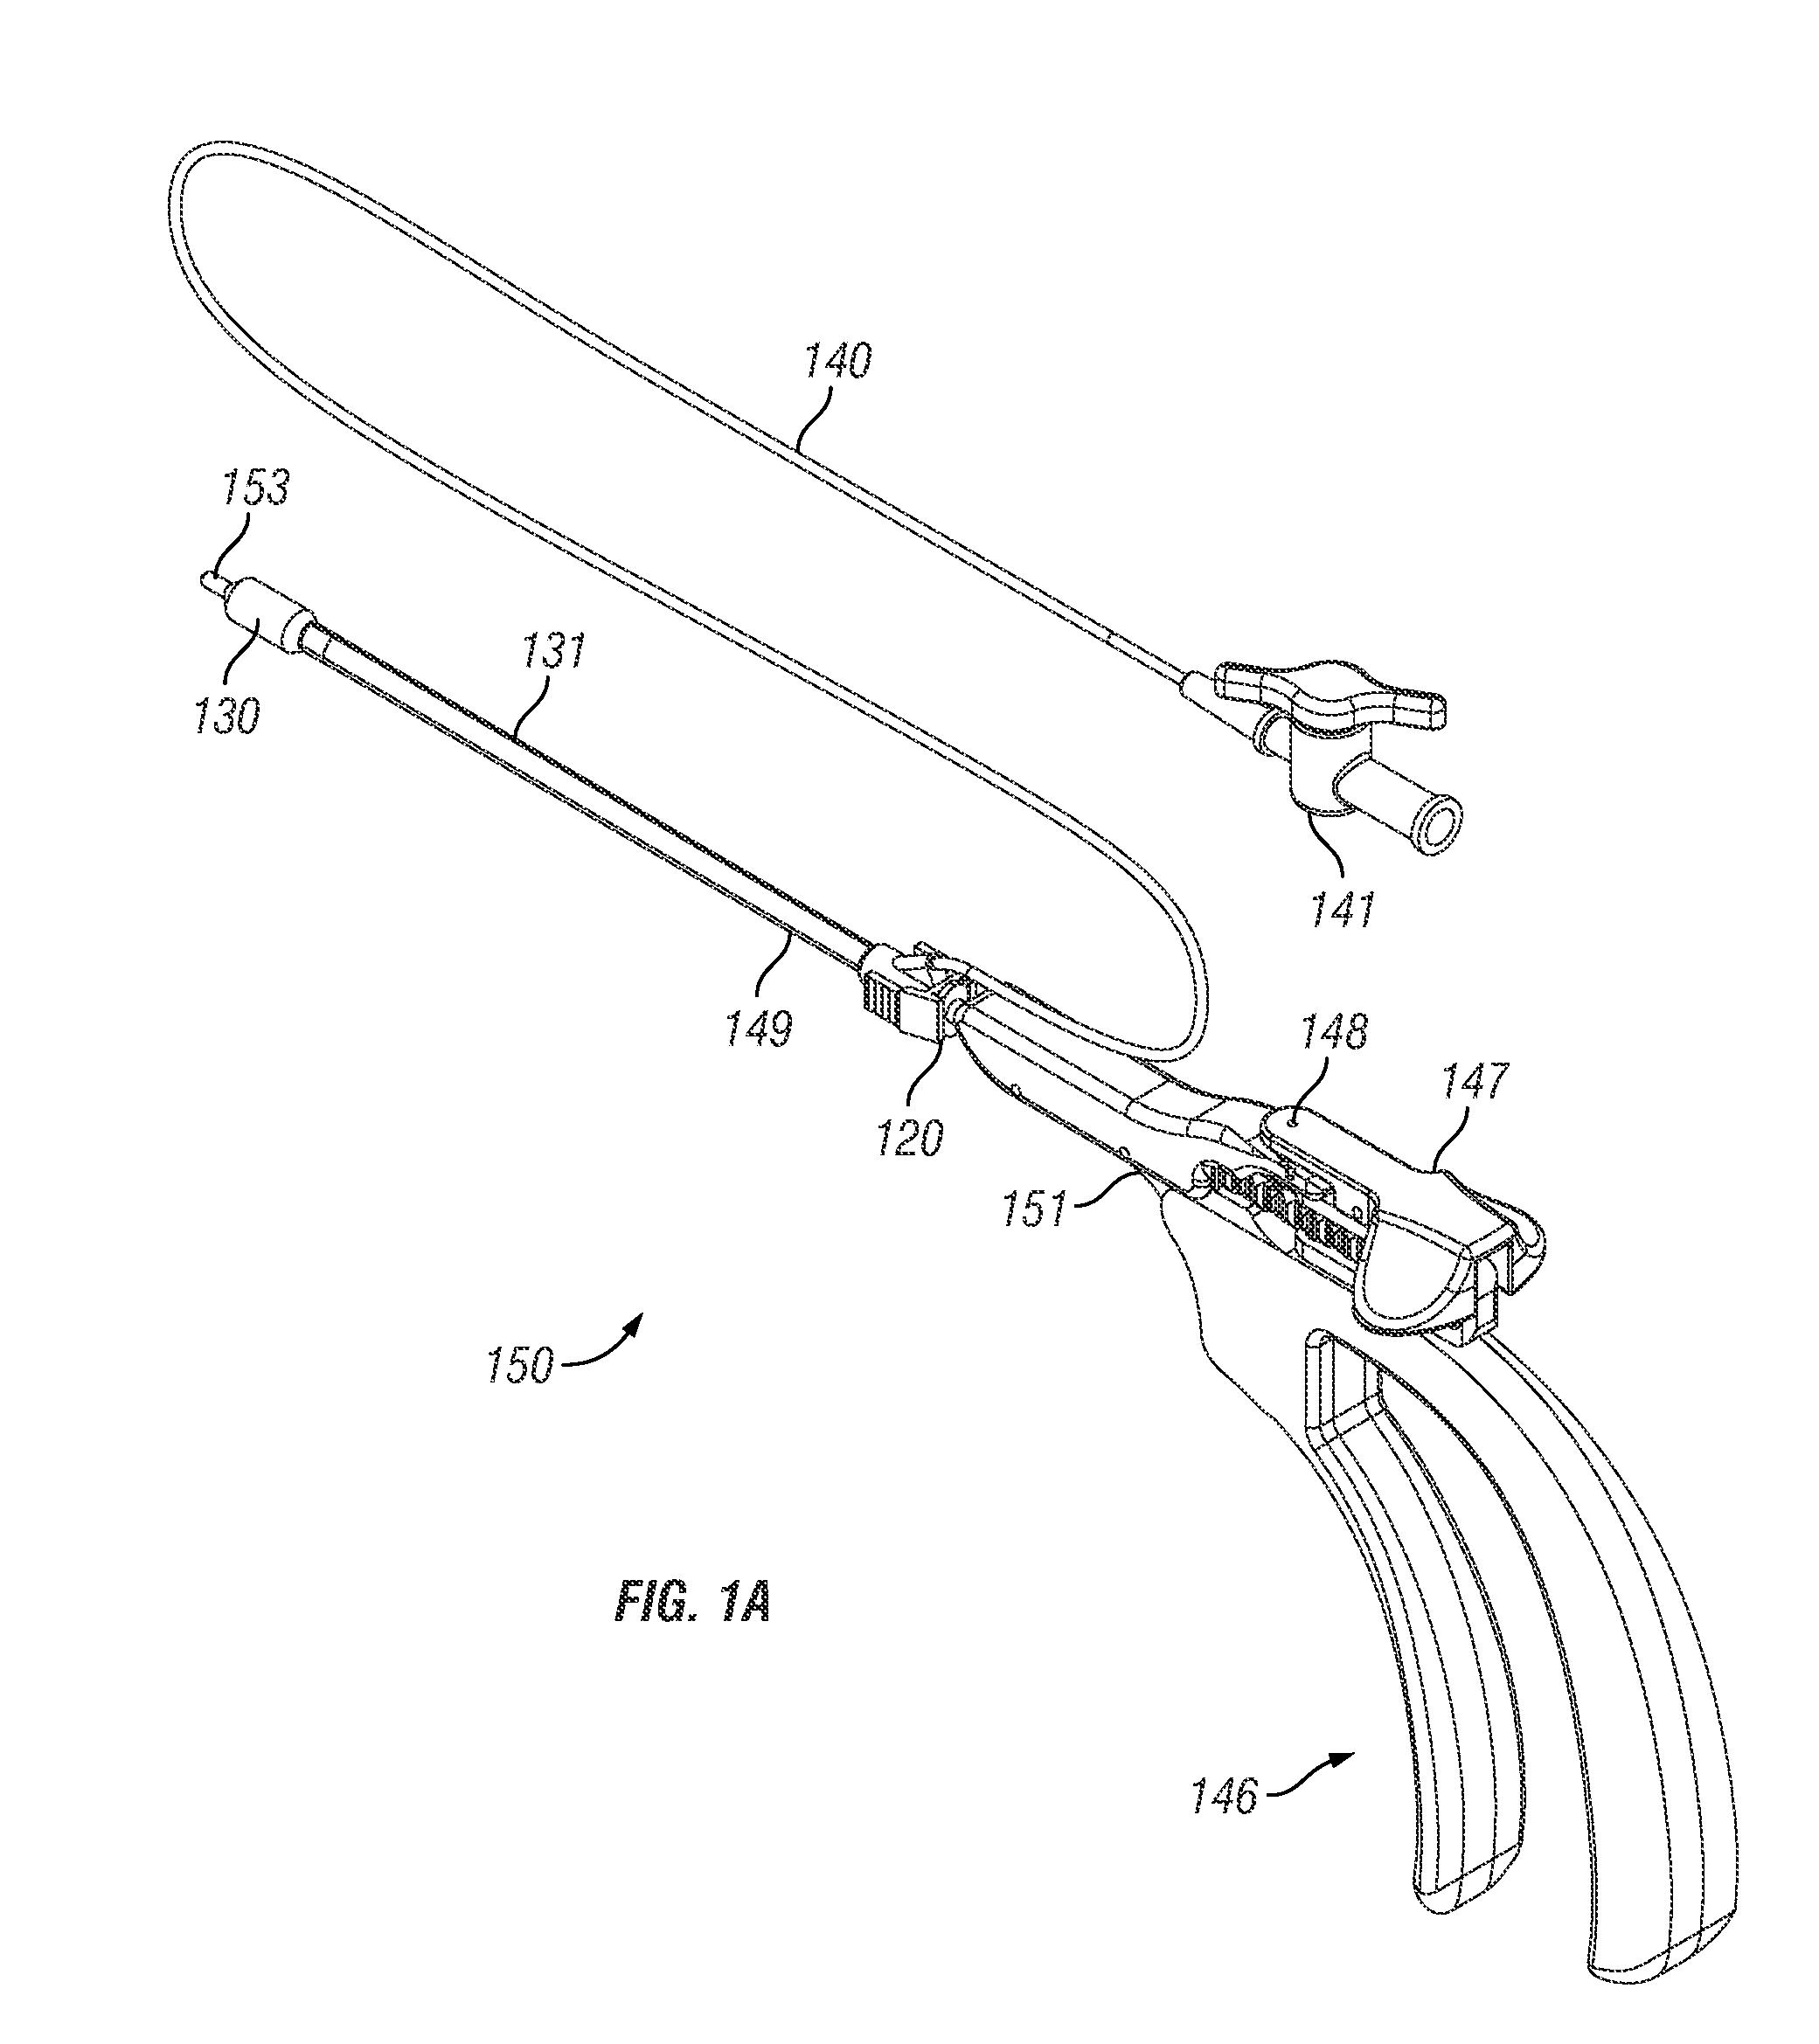 Systems, devices and methods for providing therapy to an anatomical structure using high frequency pressure waves and/or cryogenic temperatures